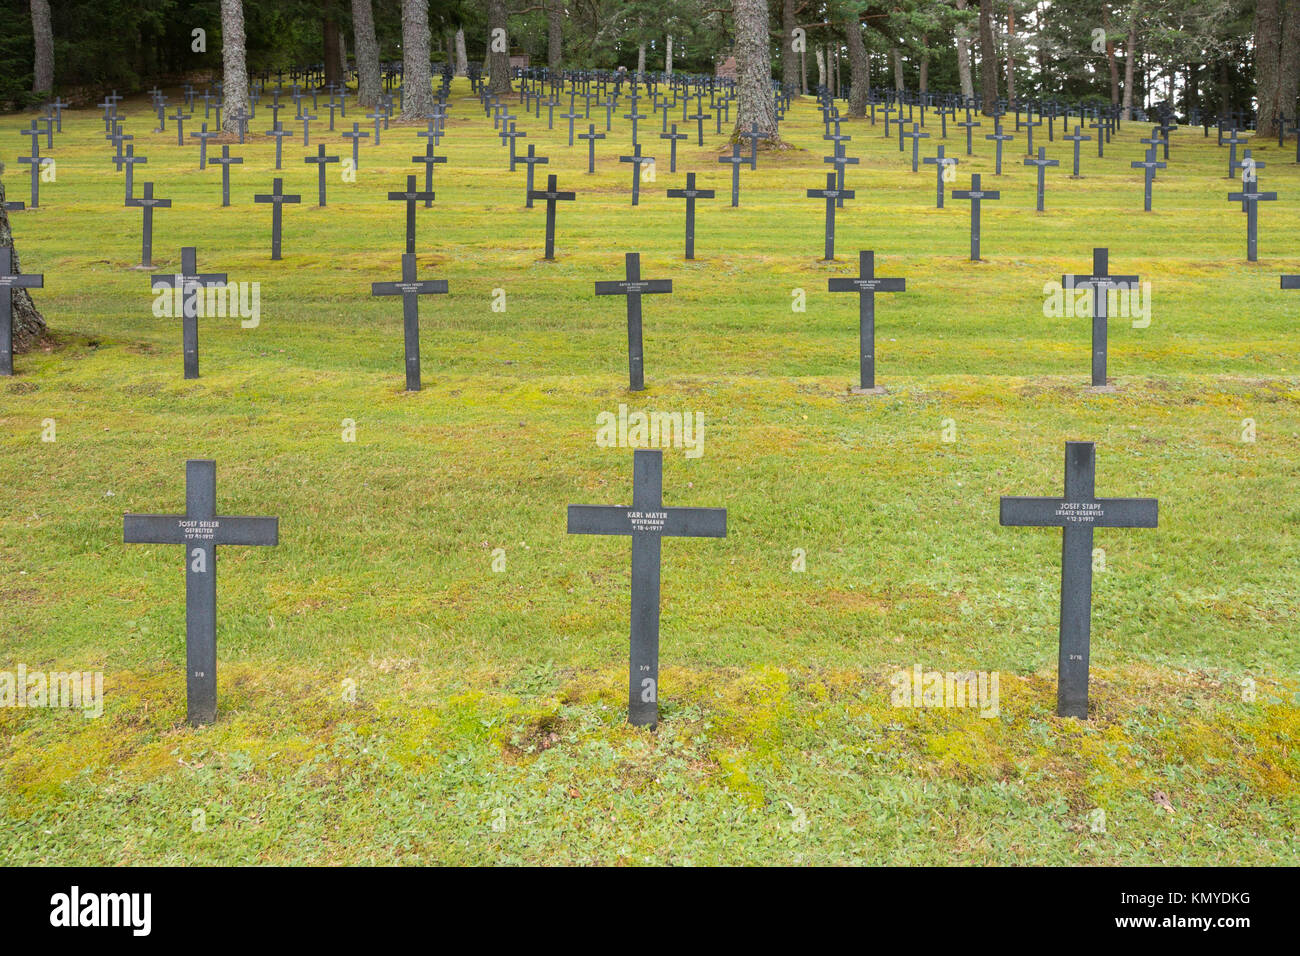 Crosses marking the graves of WW1 German war dead at the German military cemetery at Hohrod, Alsace Stock Photo